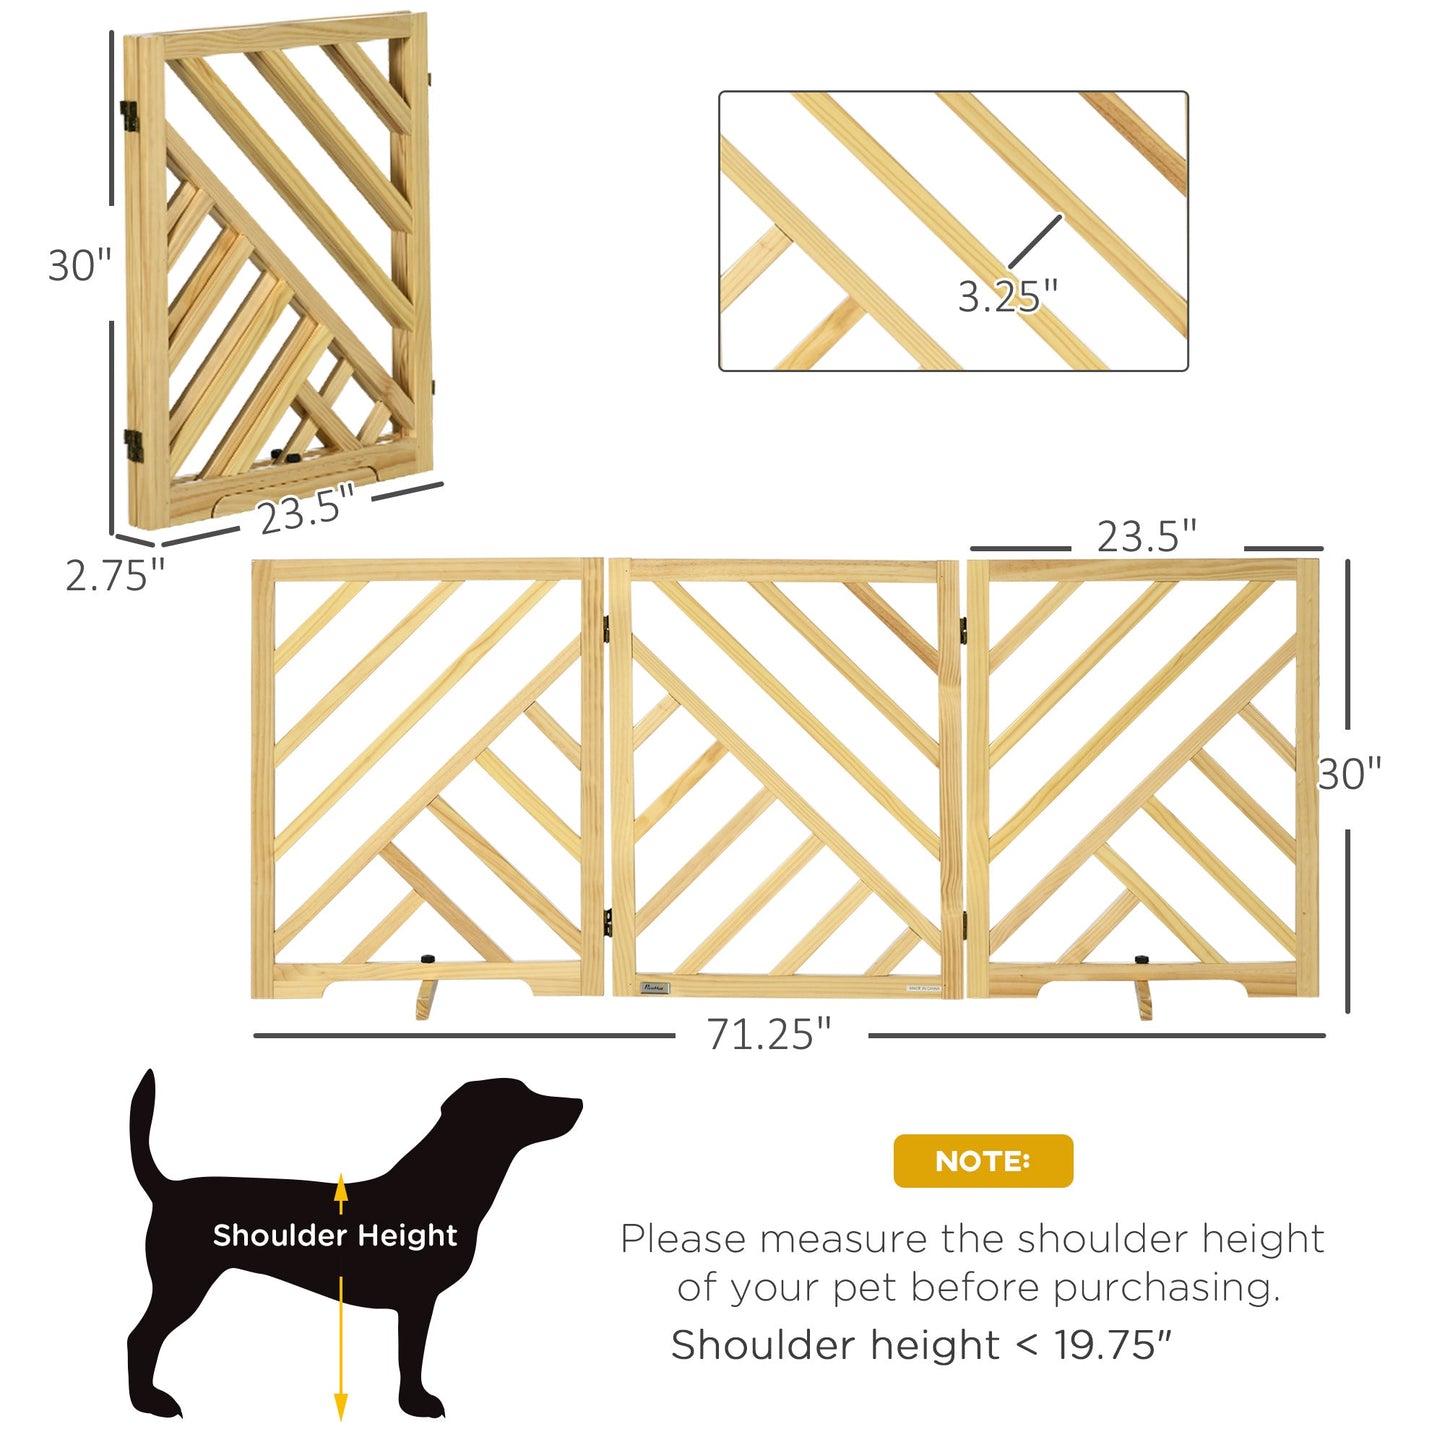 -PawHut Extra Wide Wooden Freestanding Dog Gate, Foldable Pet Gates for Dogs, 24 inch 3 Panels, Dog Gates for The House, Doorway, Stairs, Natural - Outdoor Style Company